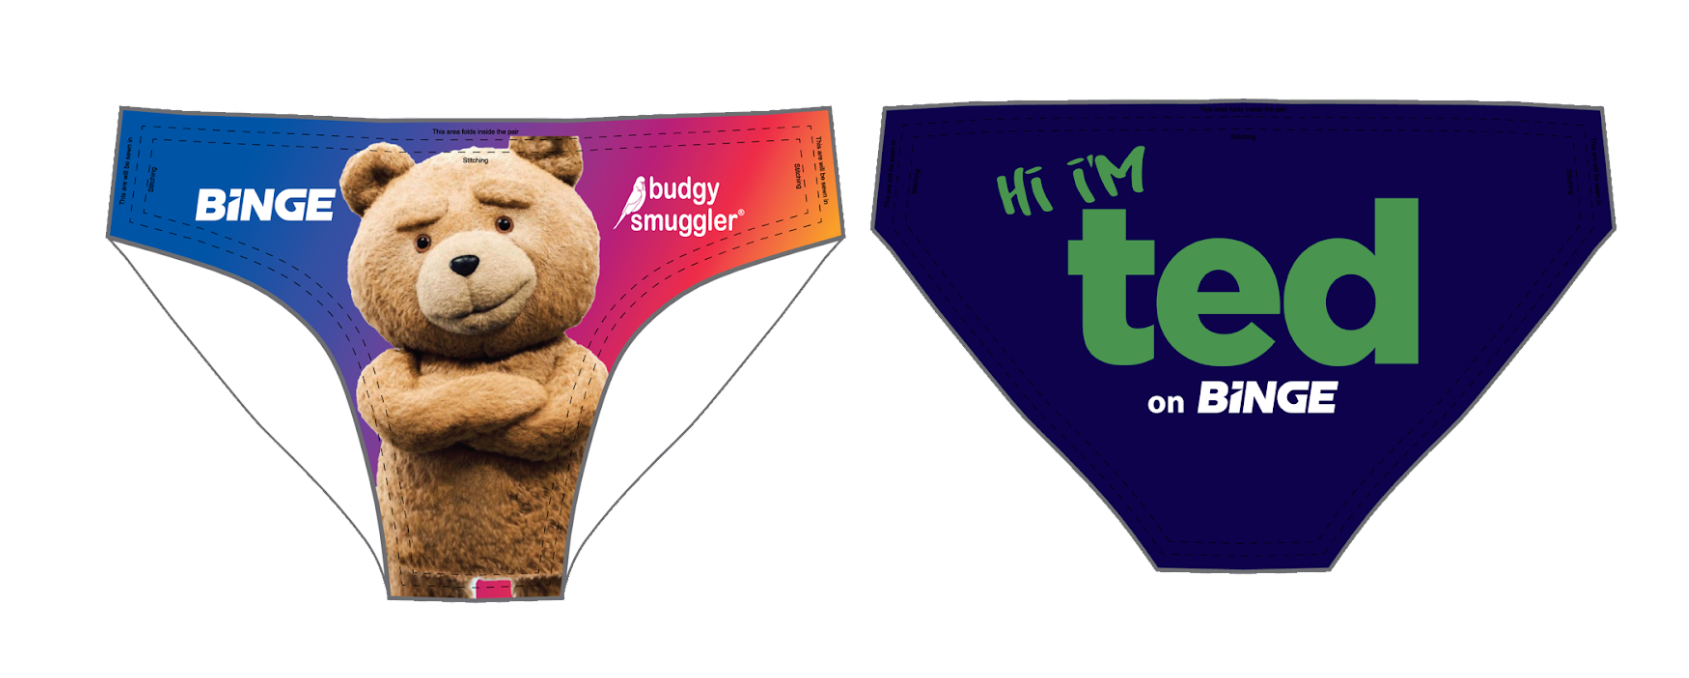 BINGE teams with Budgy Smuggler for limited-edition TED swimwear - Mumbrella